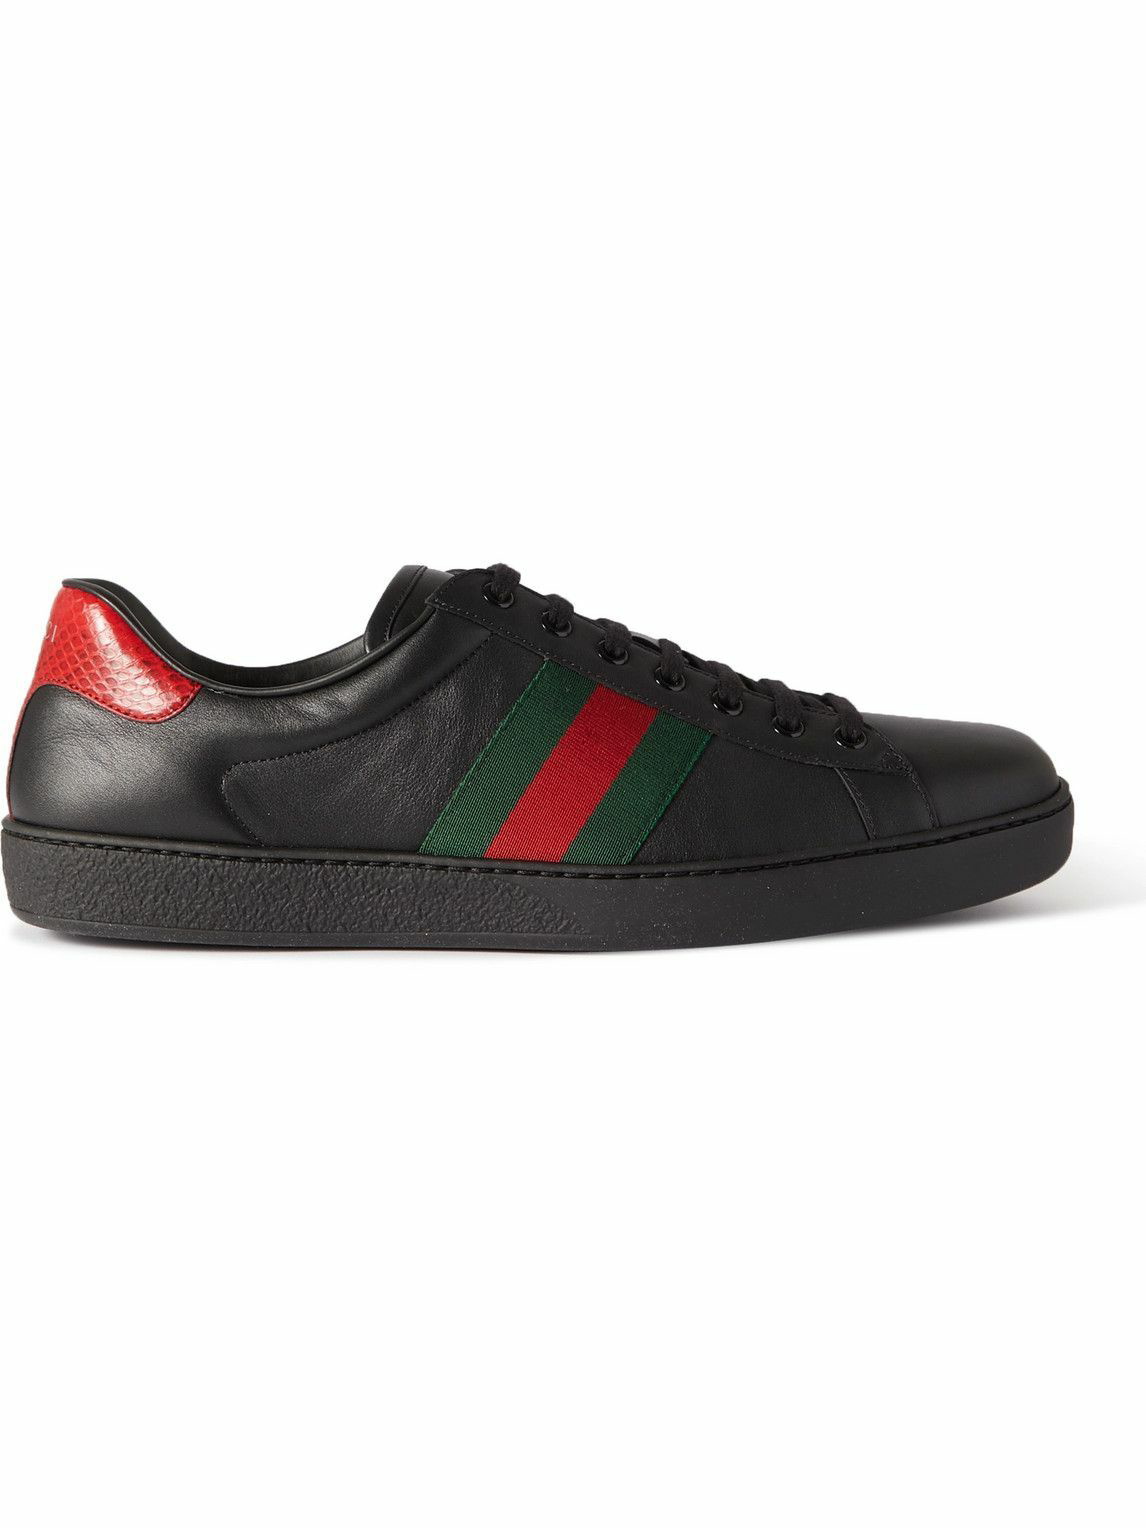 GUCCI - Ace Faux Watersnake-Trimmed Leather Sneakers - Black Gucci